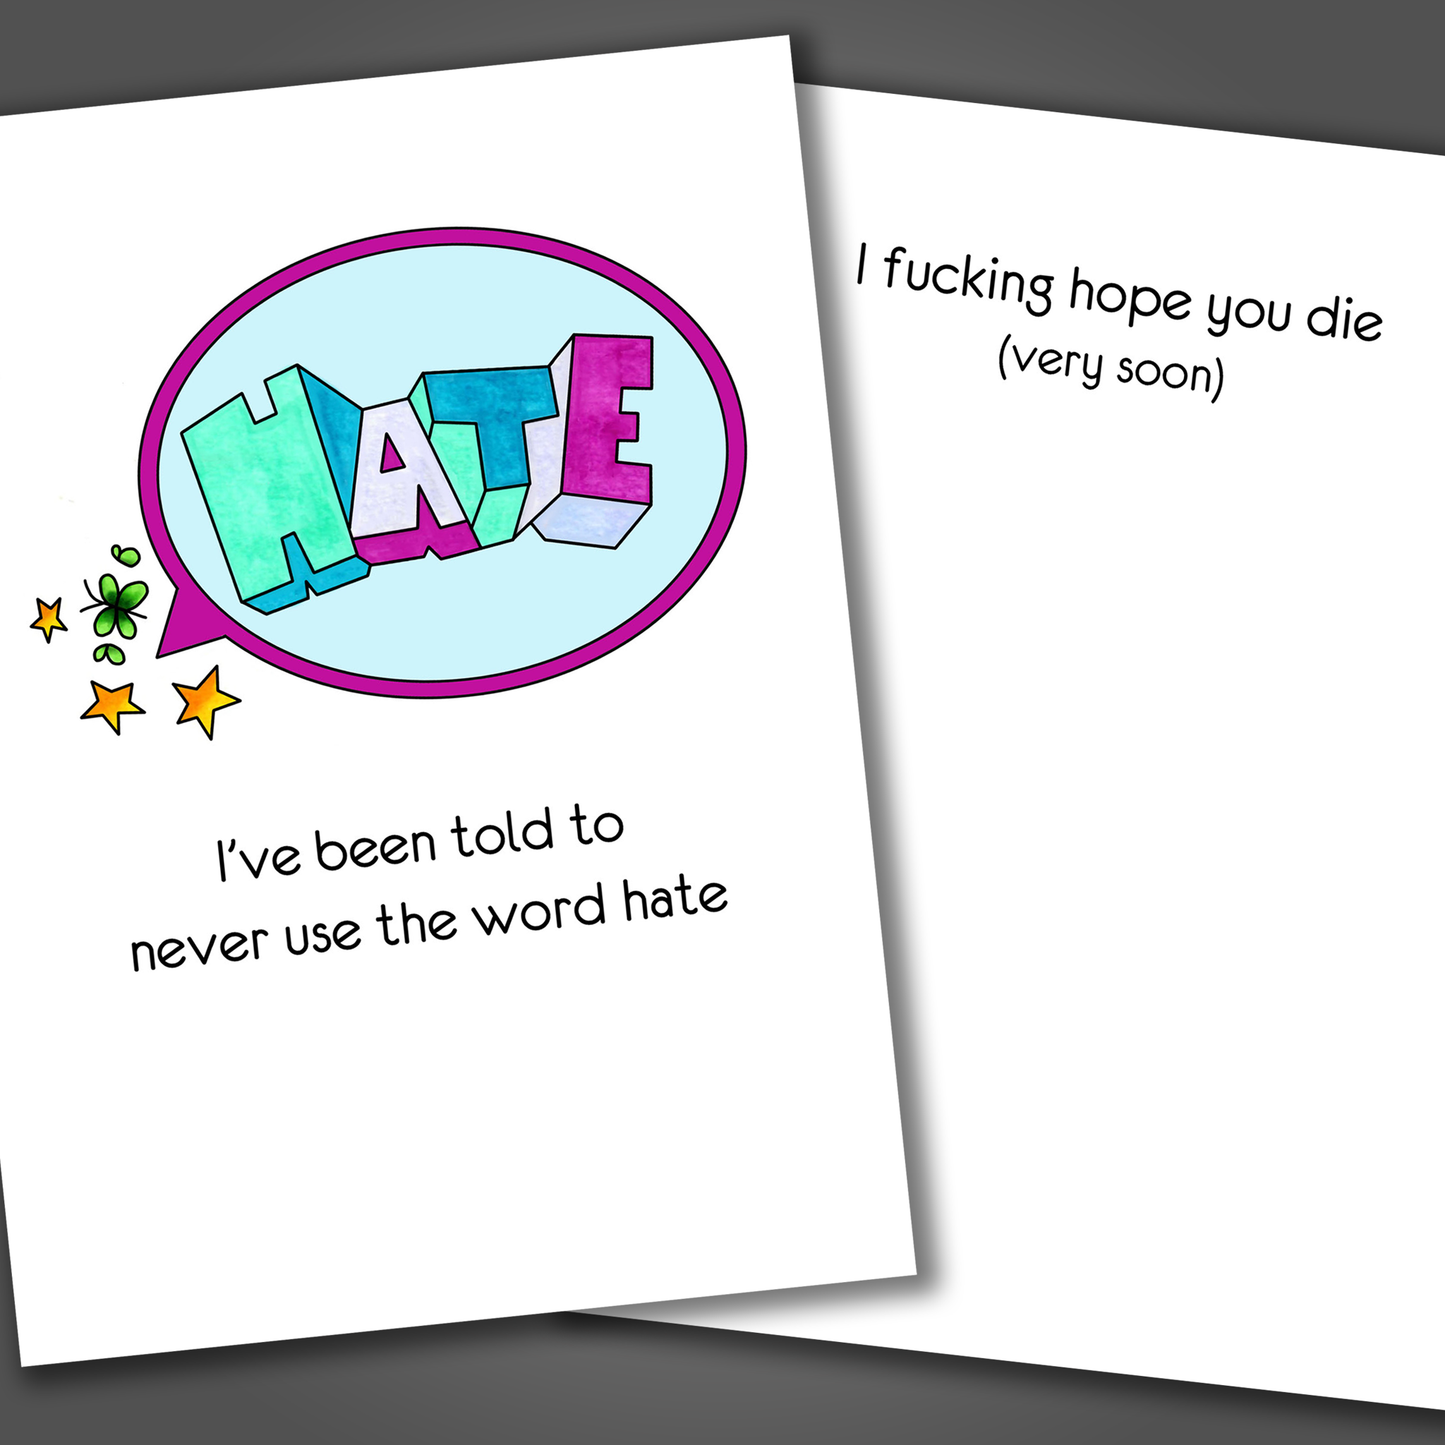 Funny divorce of breakup card with the word hate drawn in blue and purple on the front of the card. Inside the card is a joke that says I hope you fucking die (very soon).